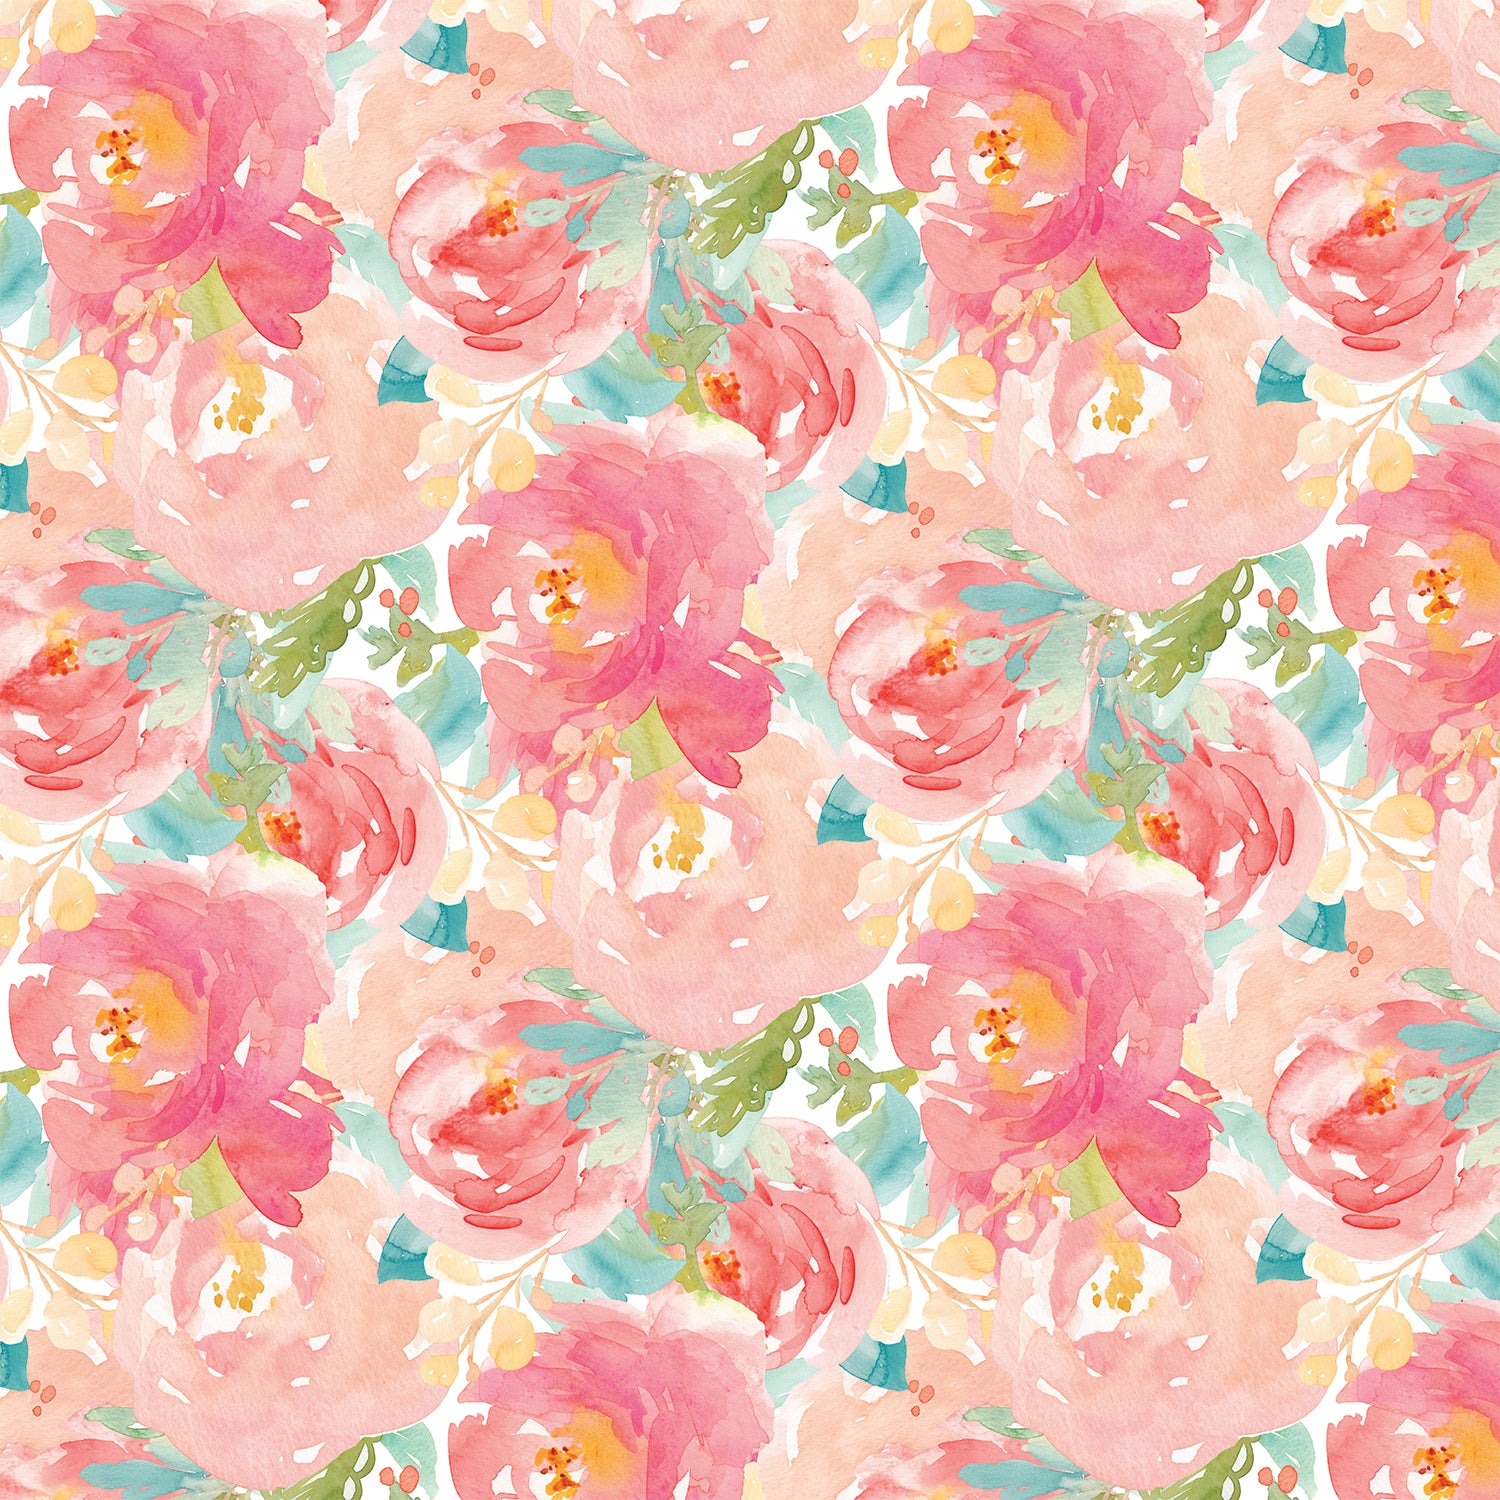 Painted Flowers Gift Wrap Sheet